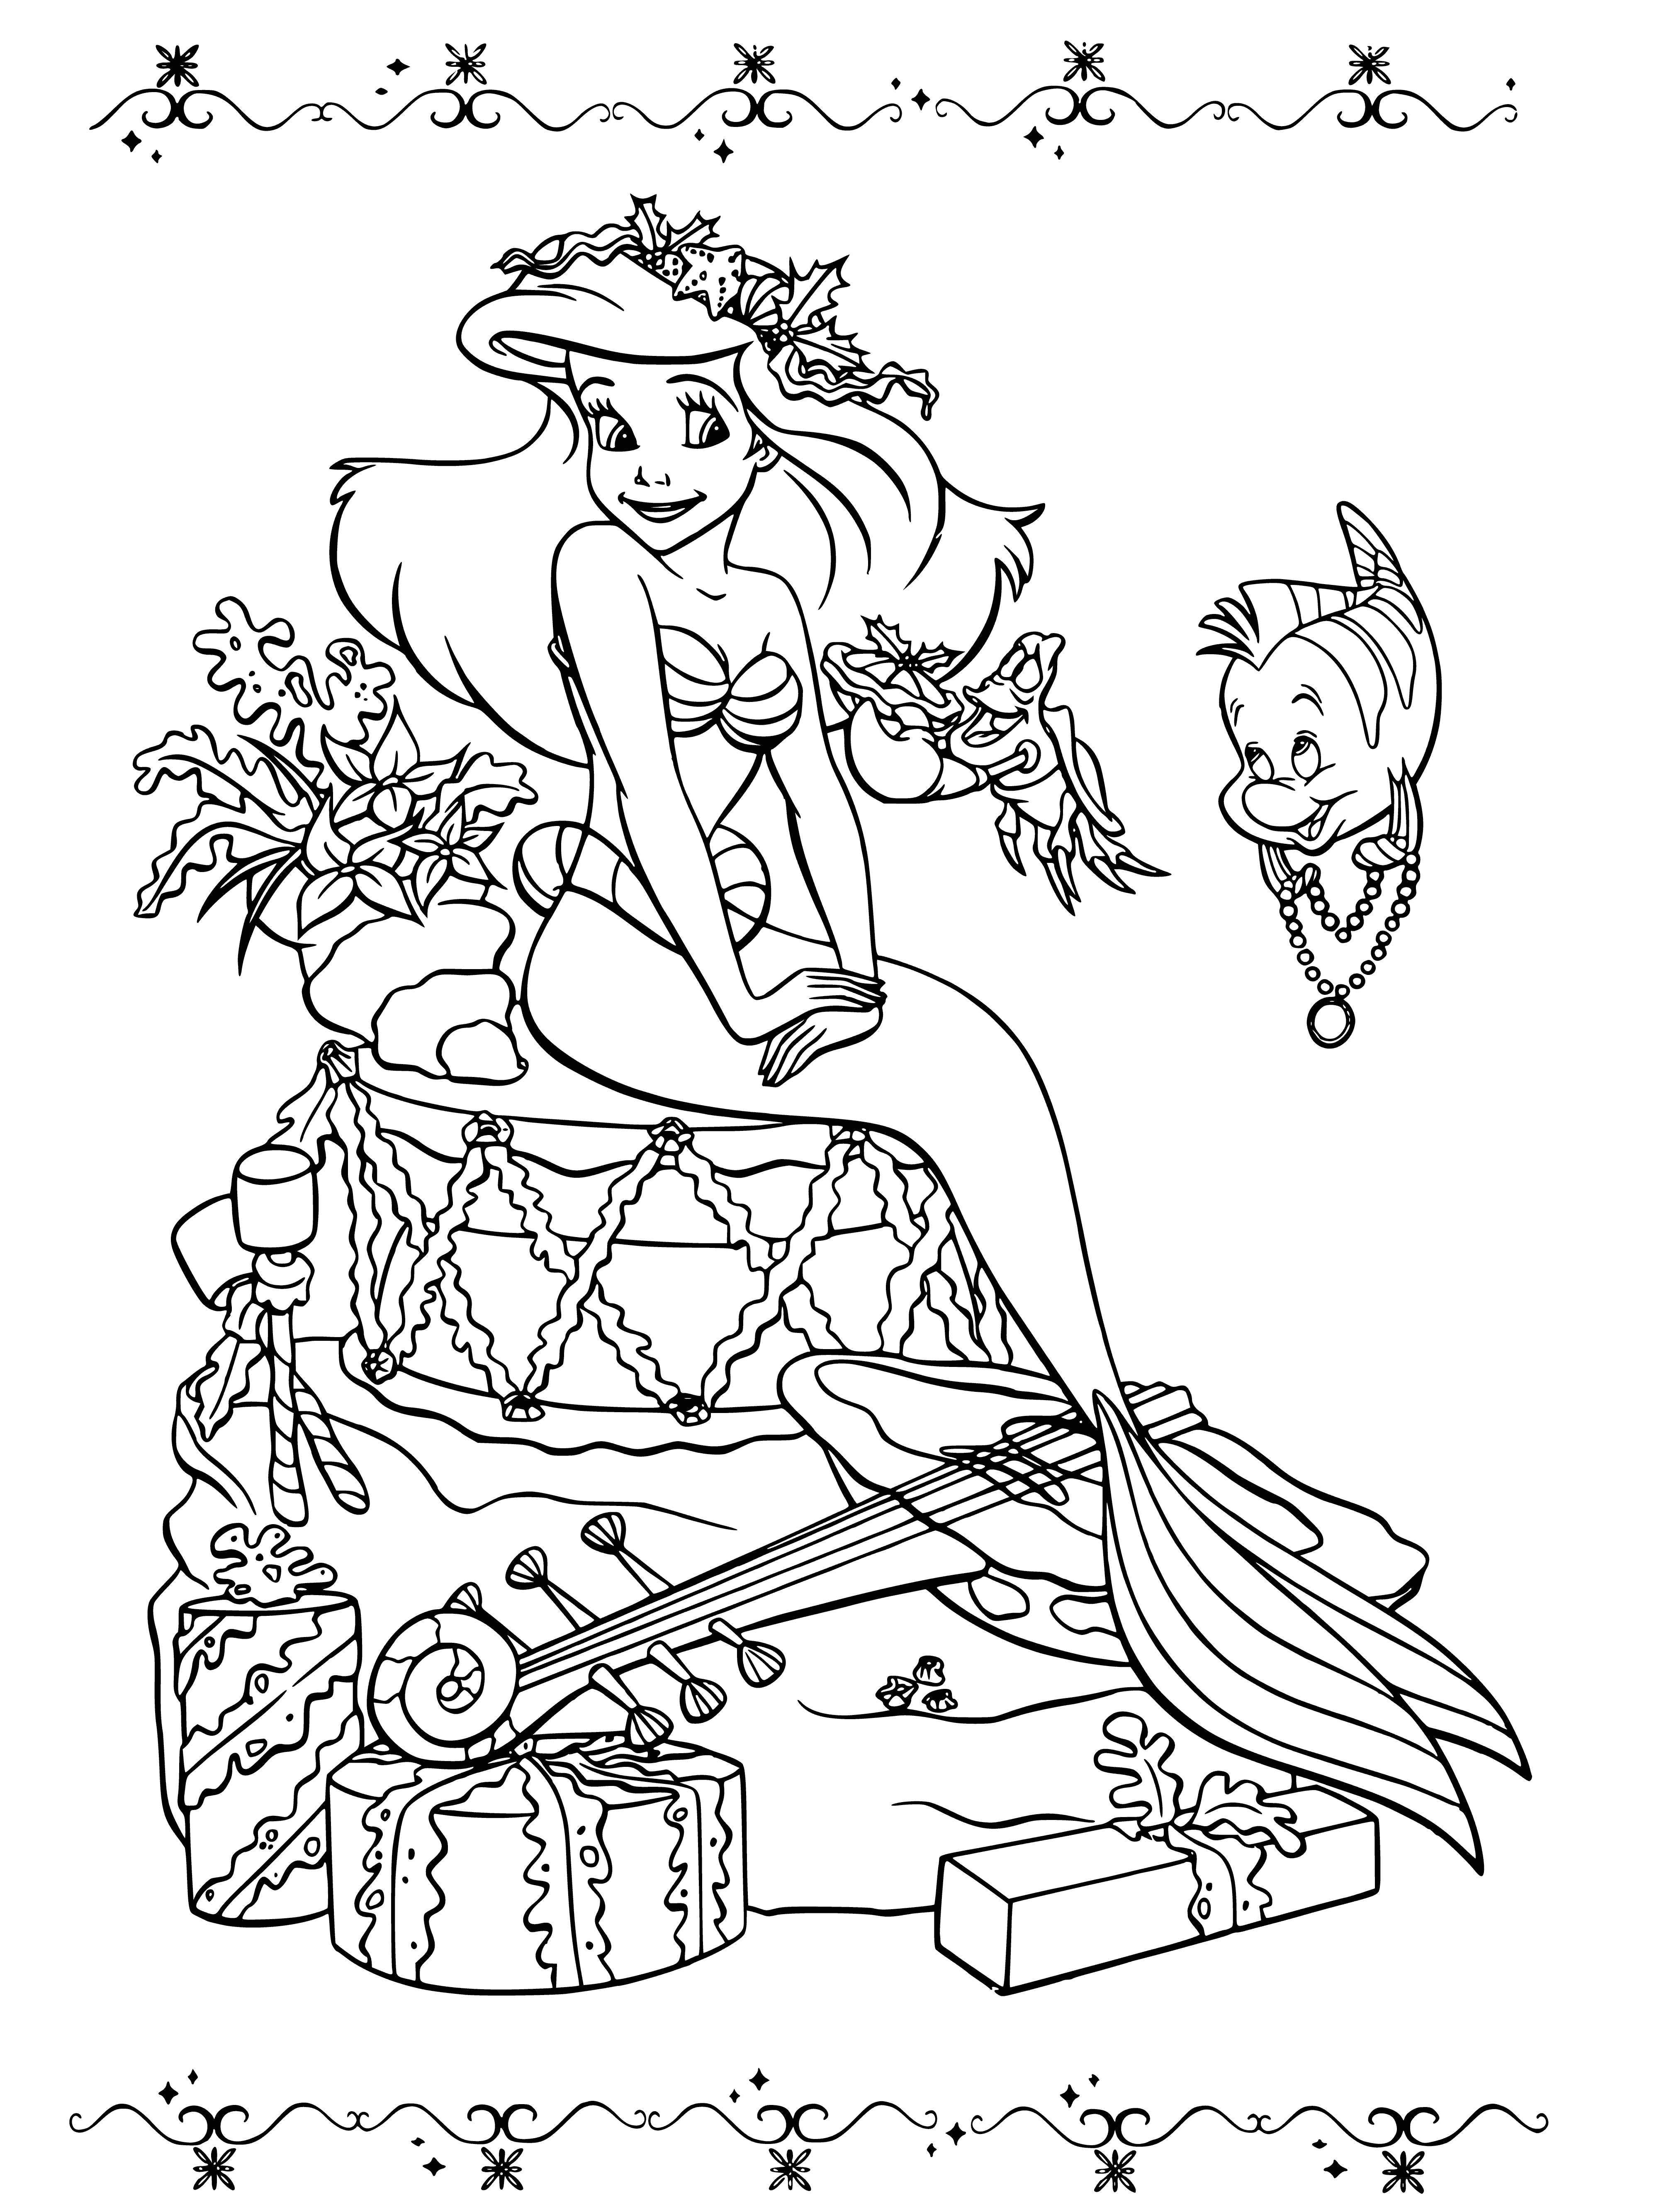 coloring page: Ariel celebrates the New Year with lots of gifts from her family and friends, ready to make it a bang!